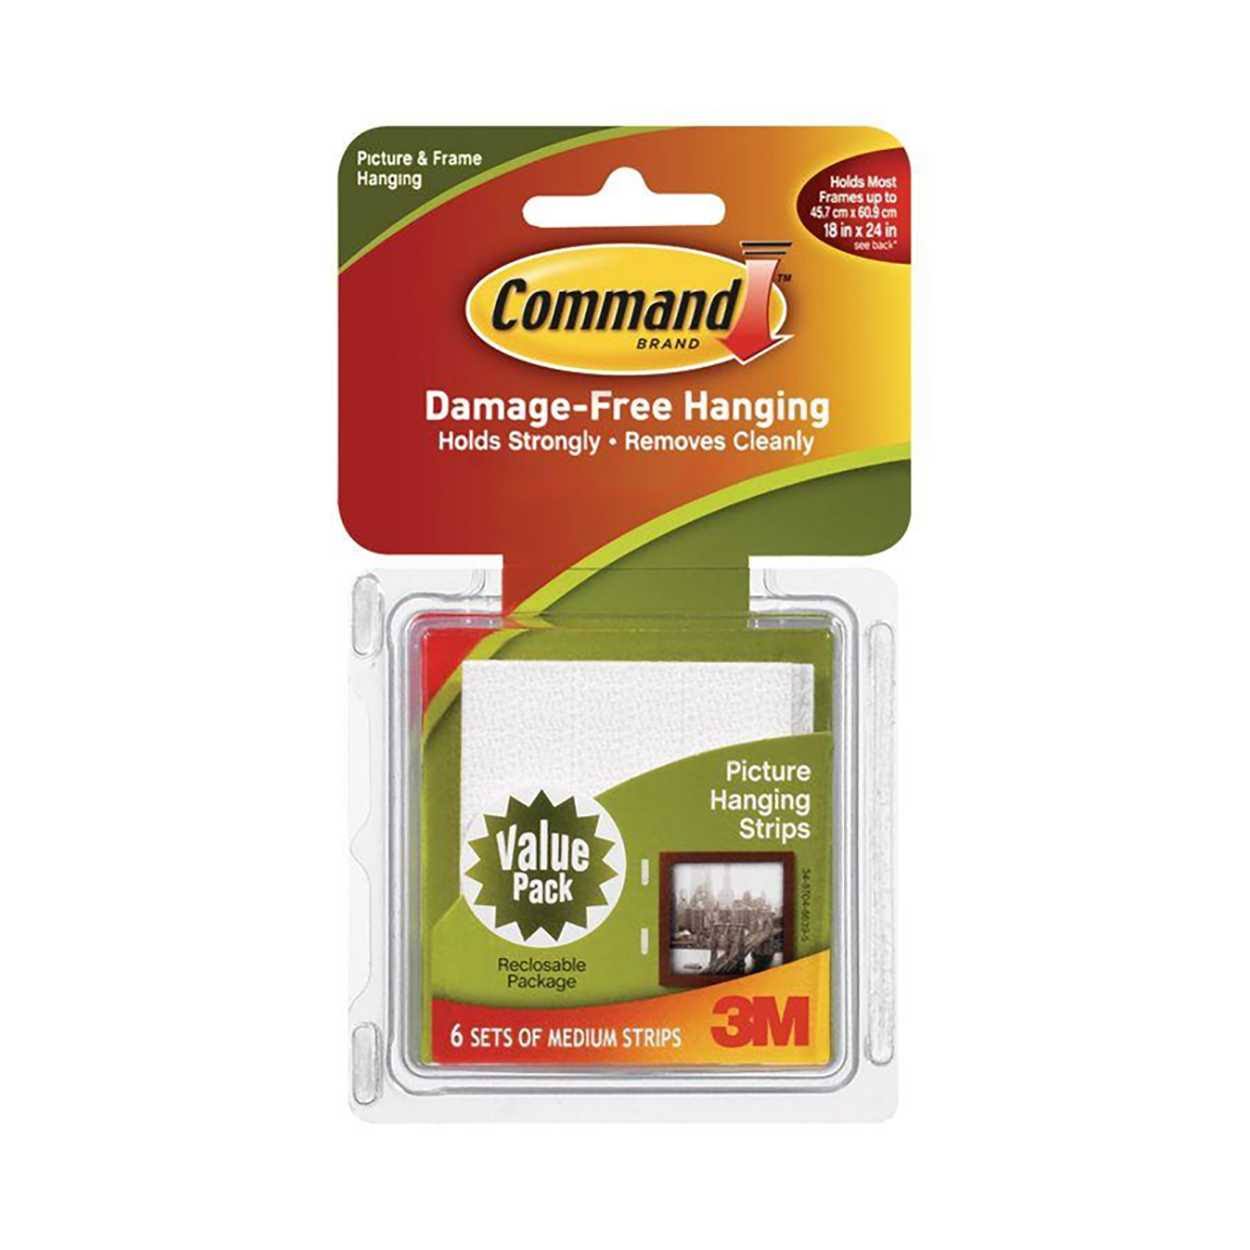 3M Command Brand Medium Picture Hanging Strips - 6ct